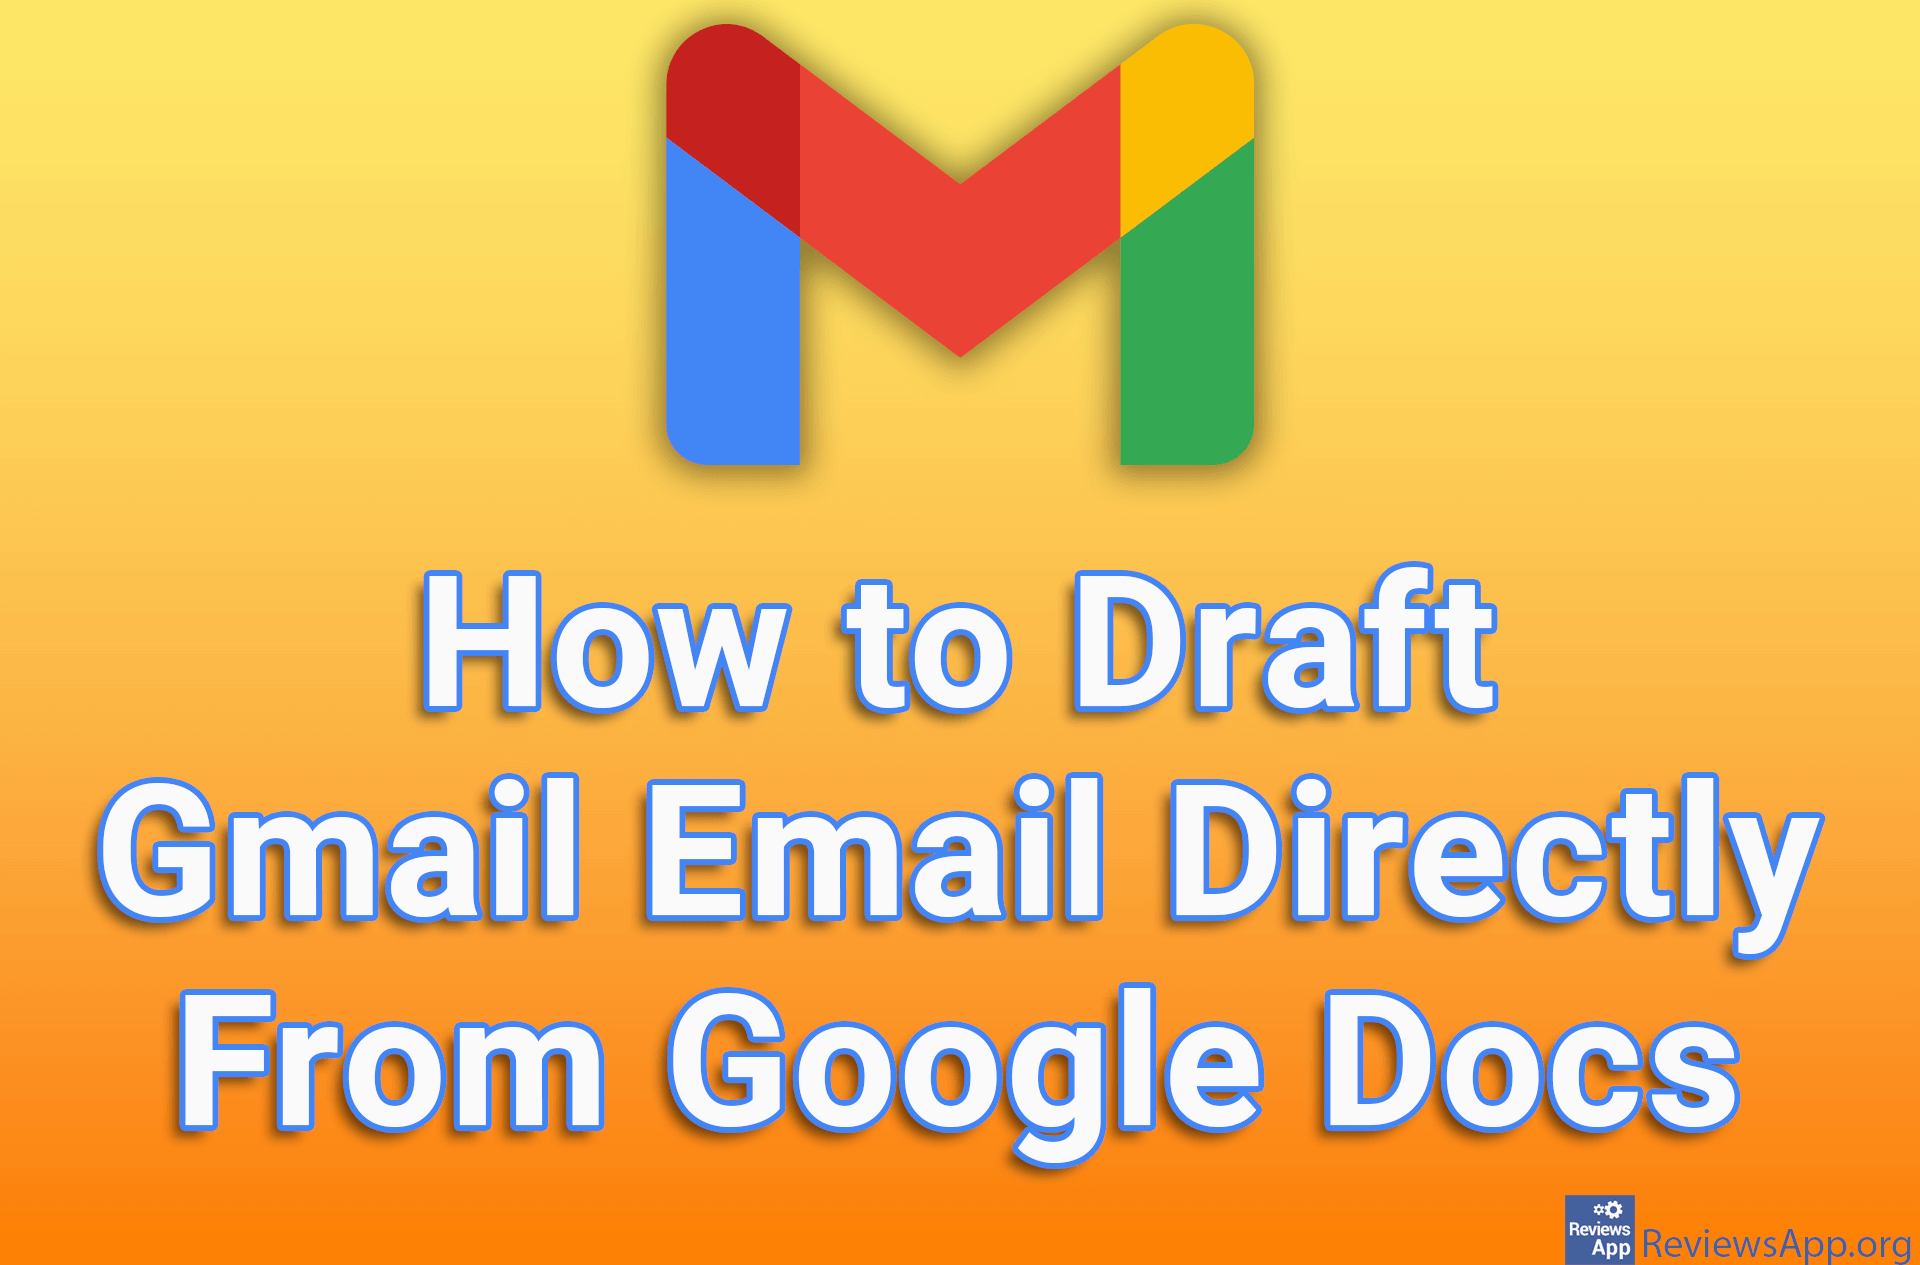 How to Draft Gmail Email Directly From Google Docs